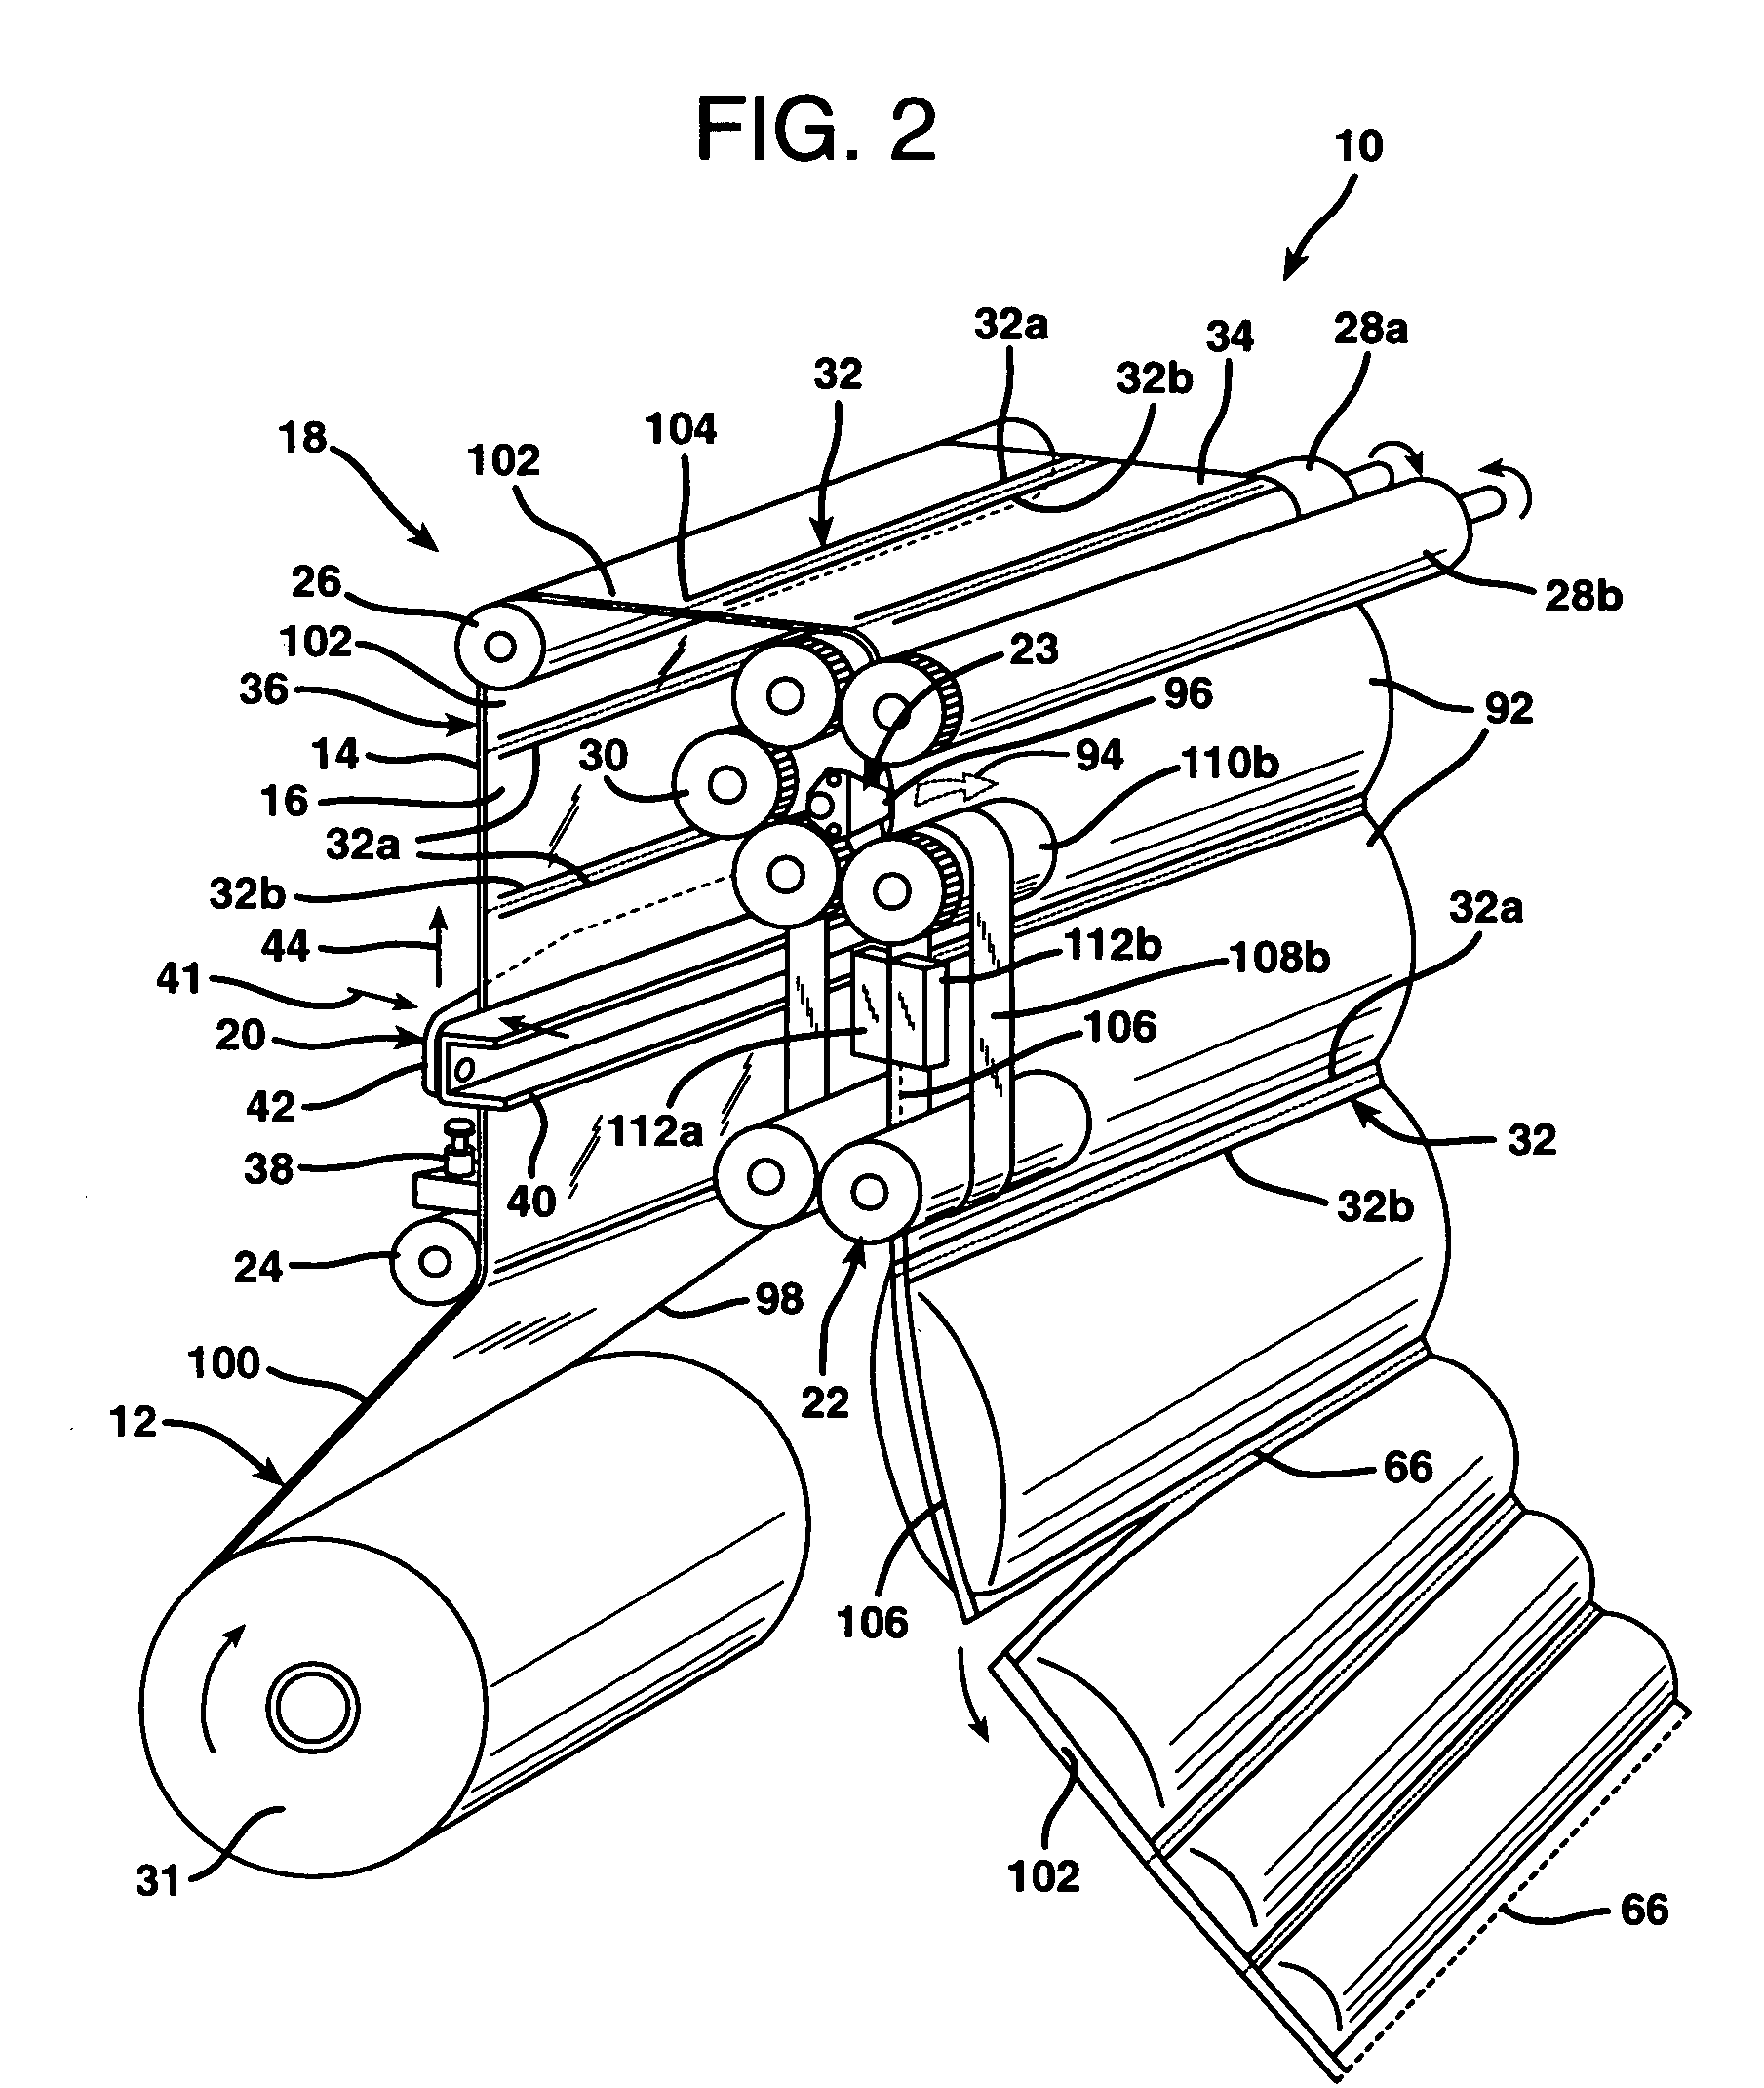 Apparatus and method for forming inflated containers